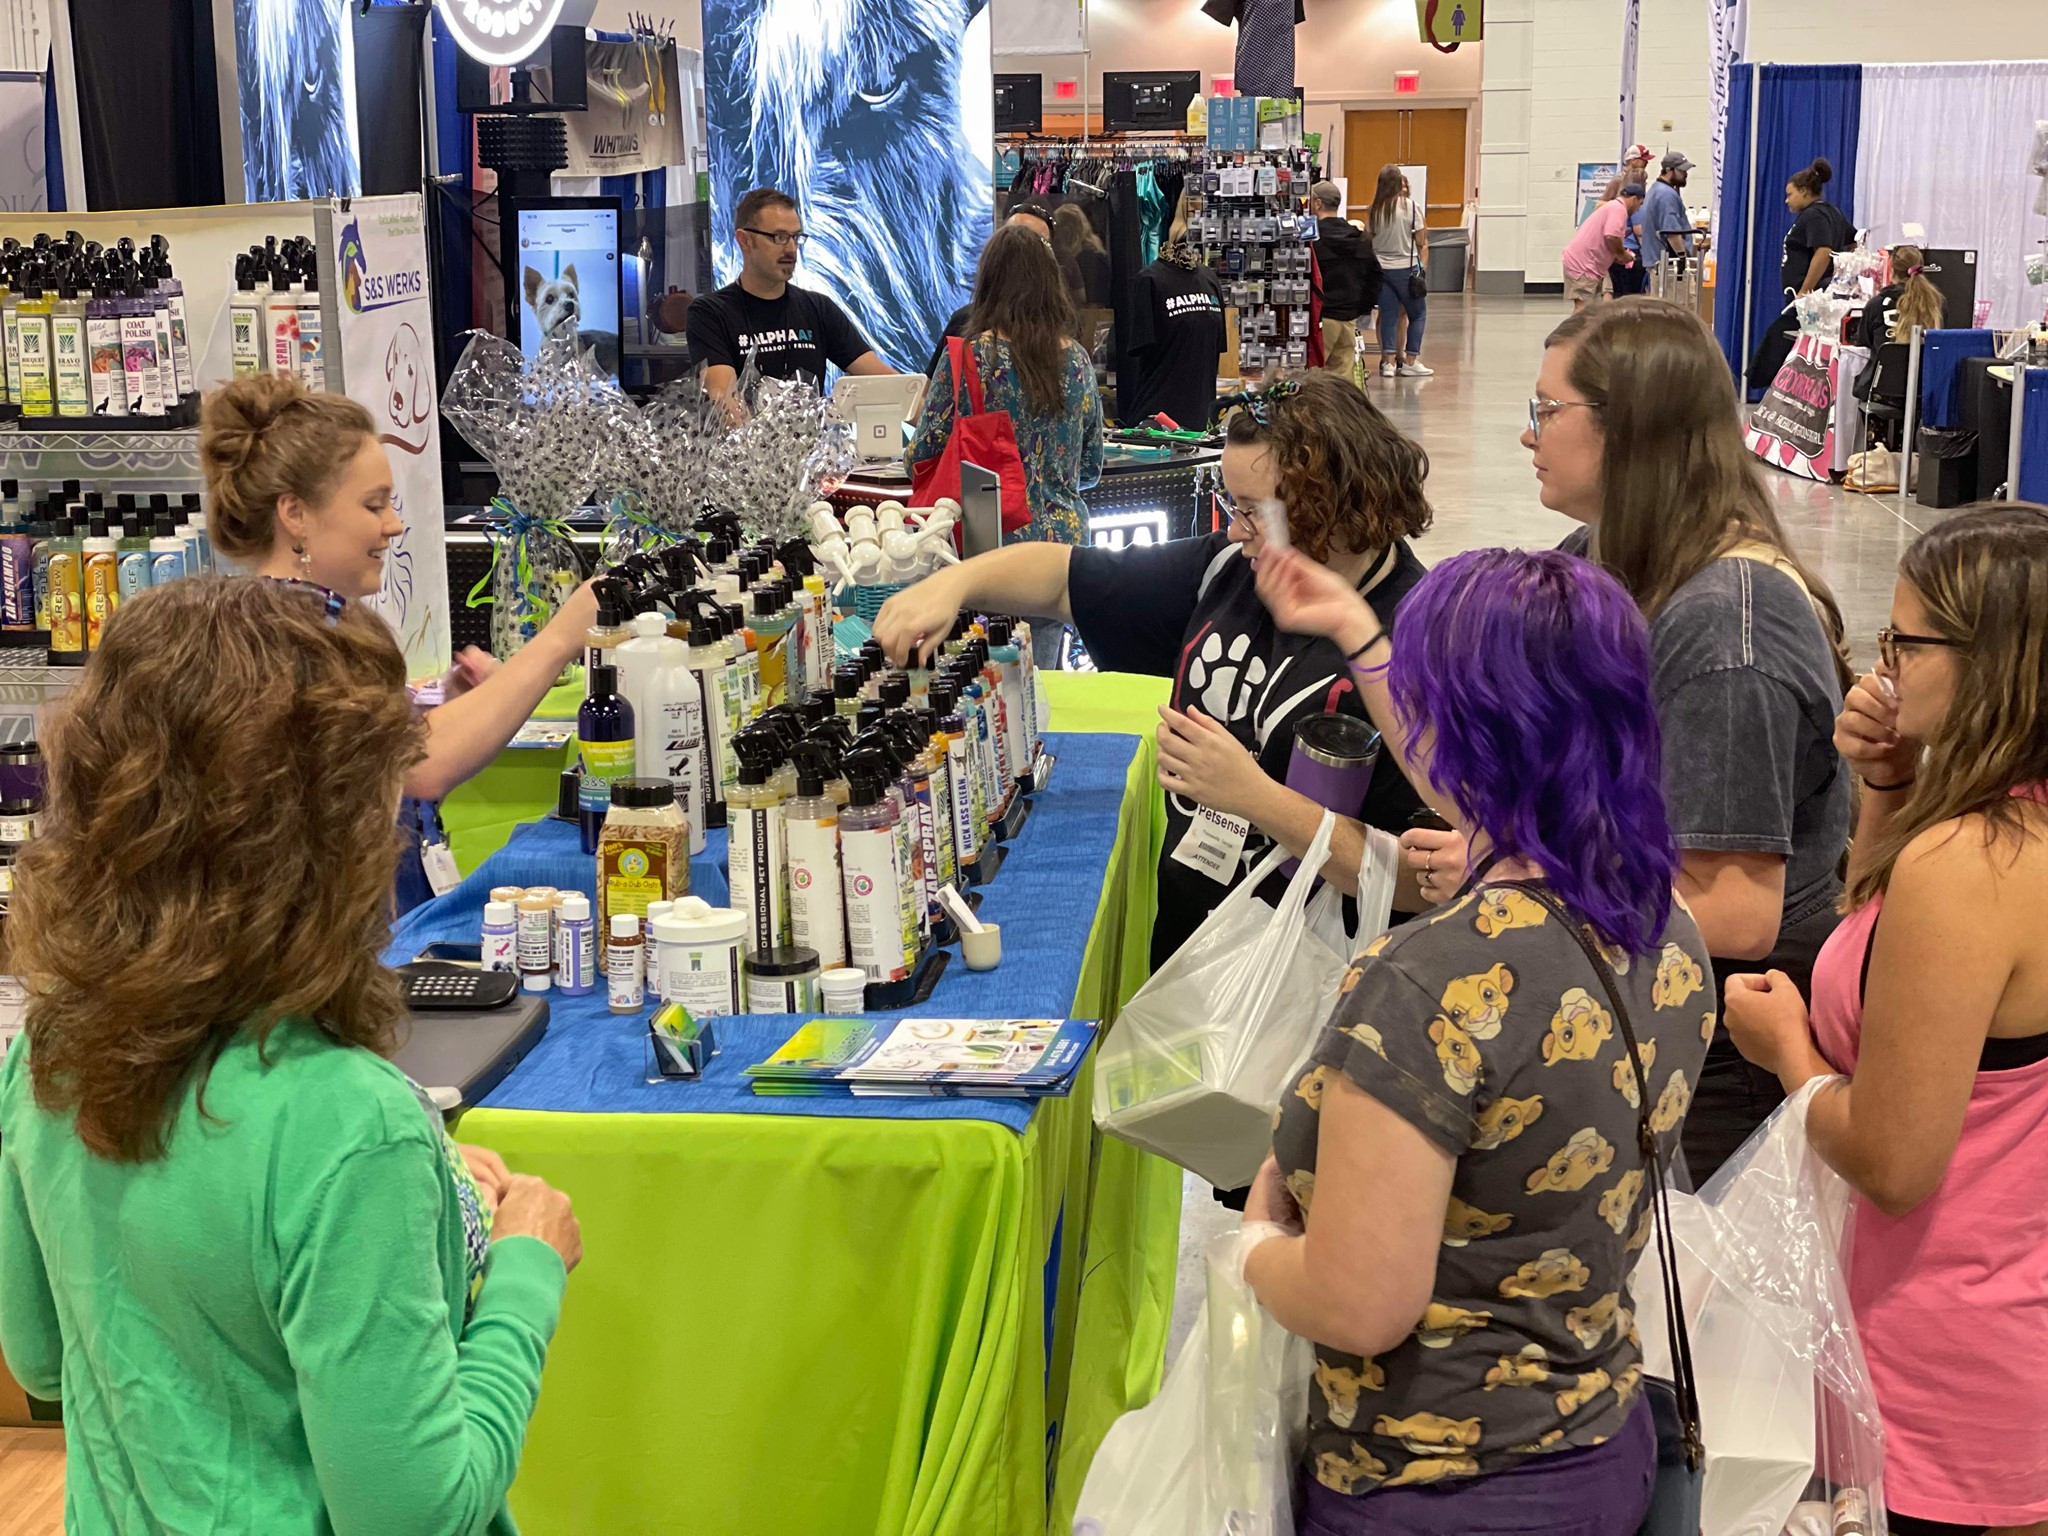 An exhibitor shows products to onlookers at the 2021 Atlanta Pet Fair & Conference.